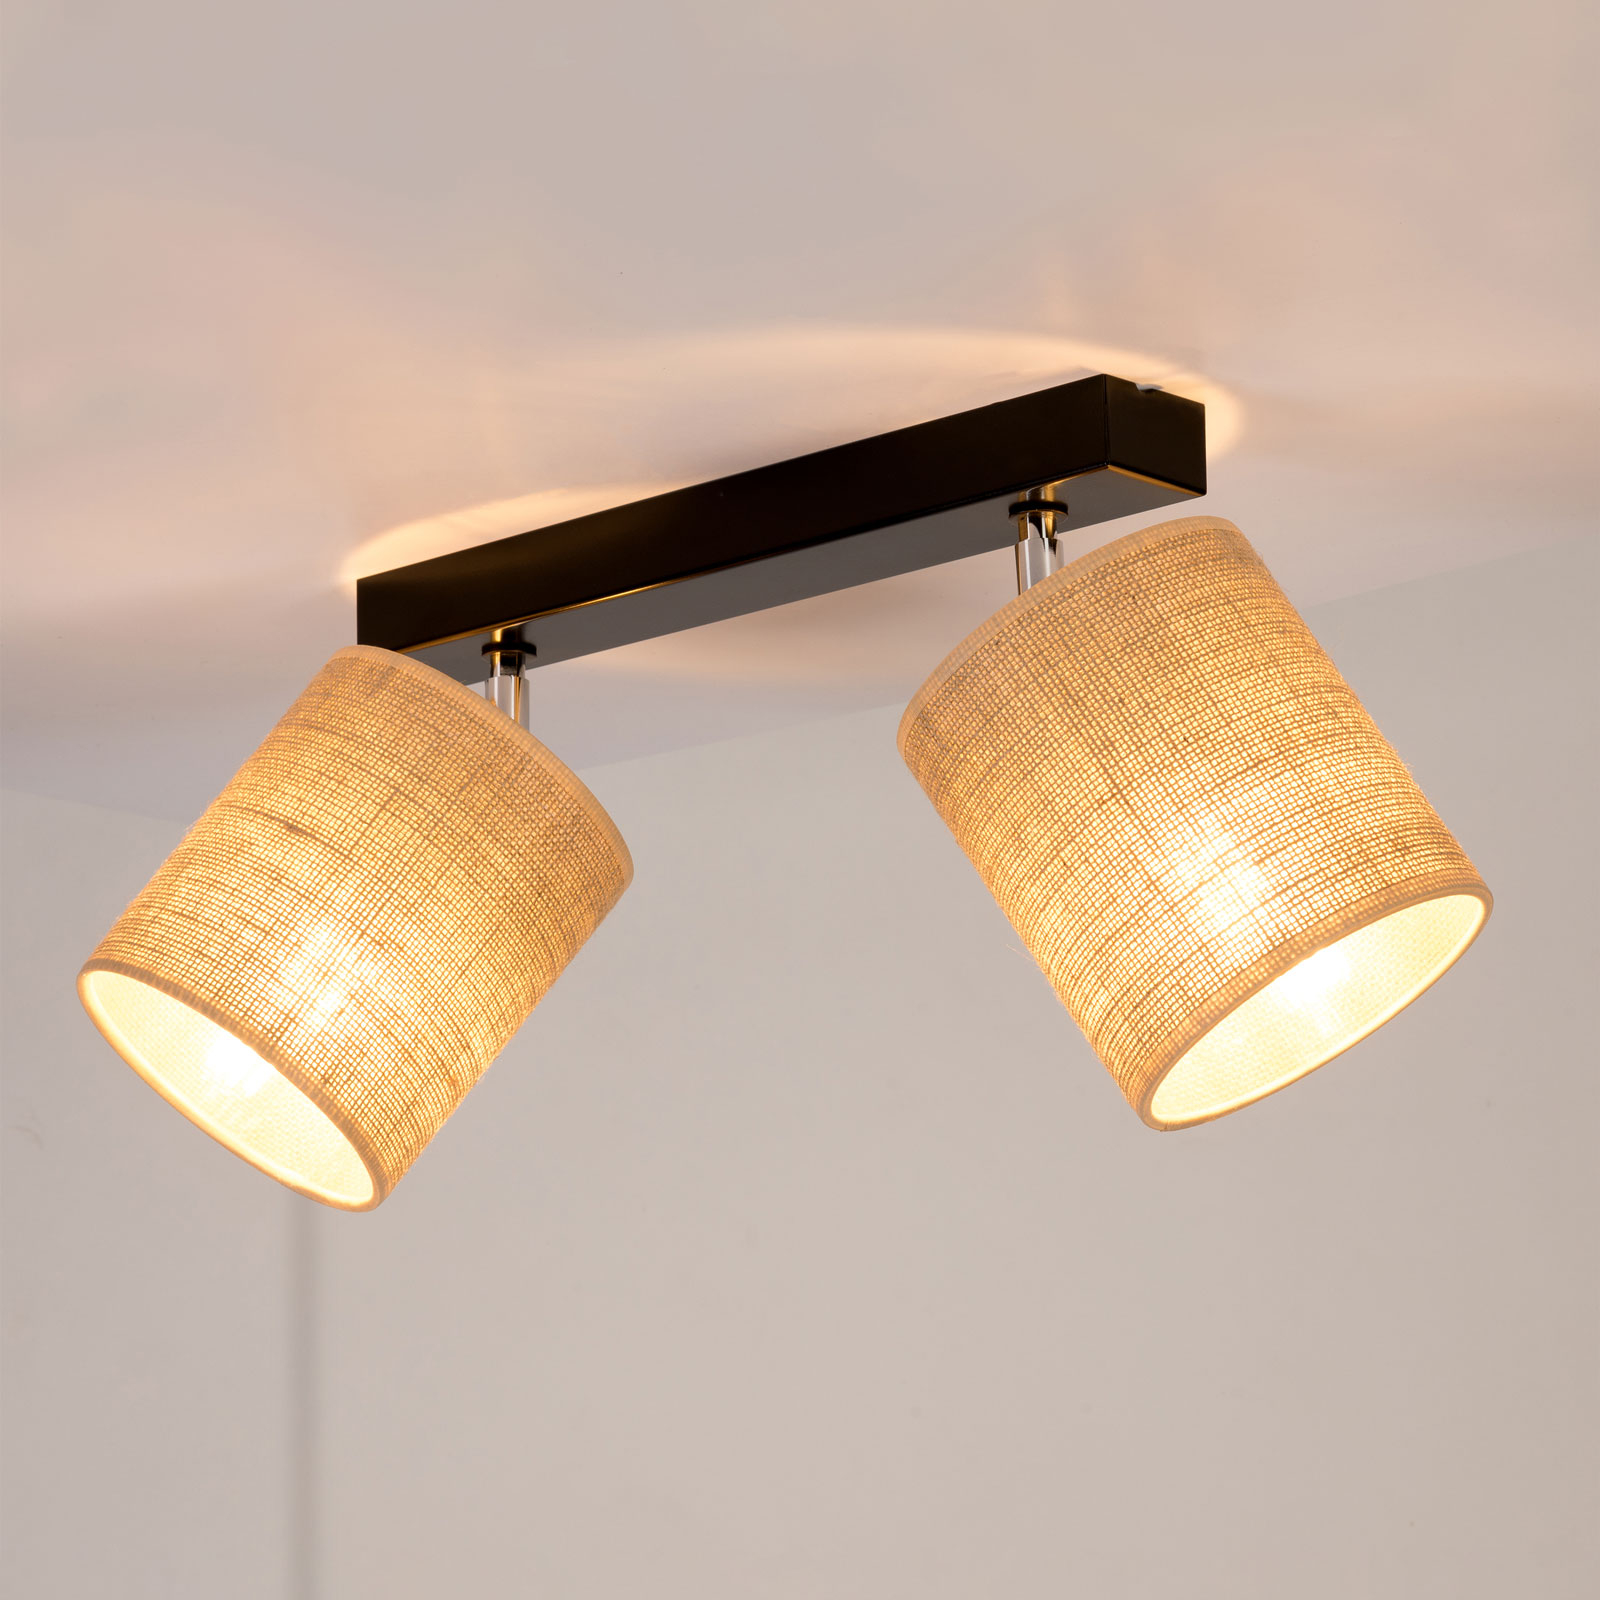 Jute ceiling light with fabric lampshades, 2-bulb